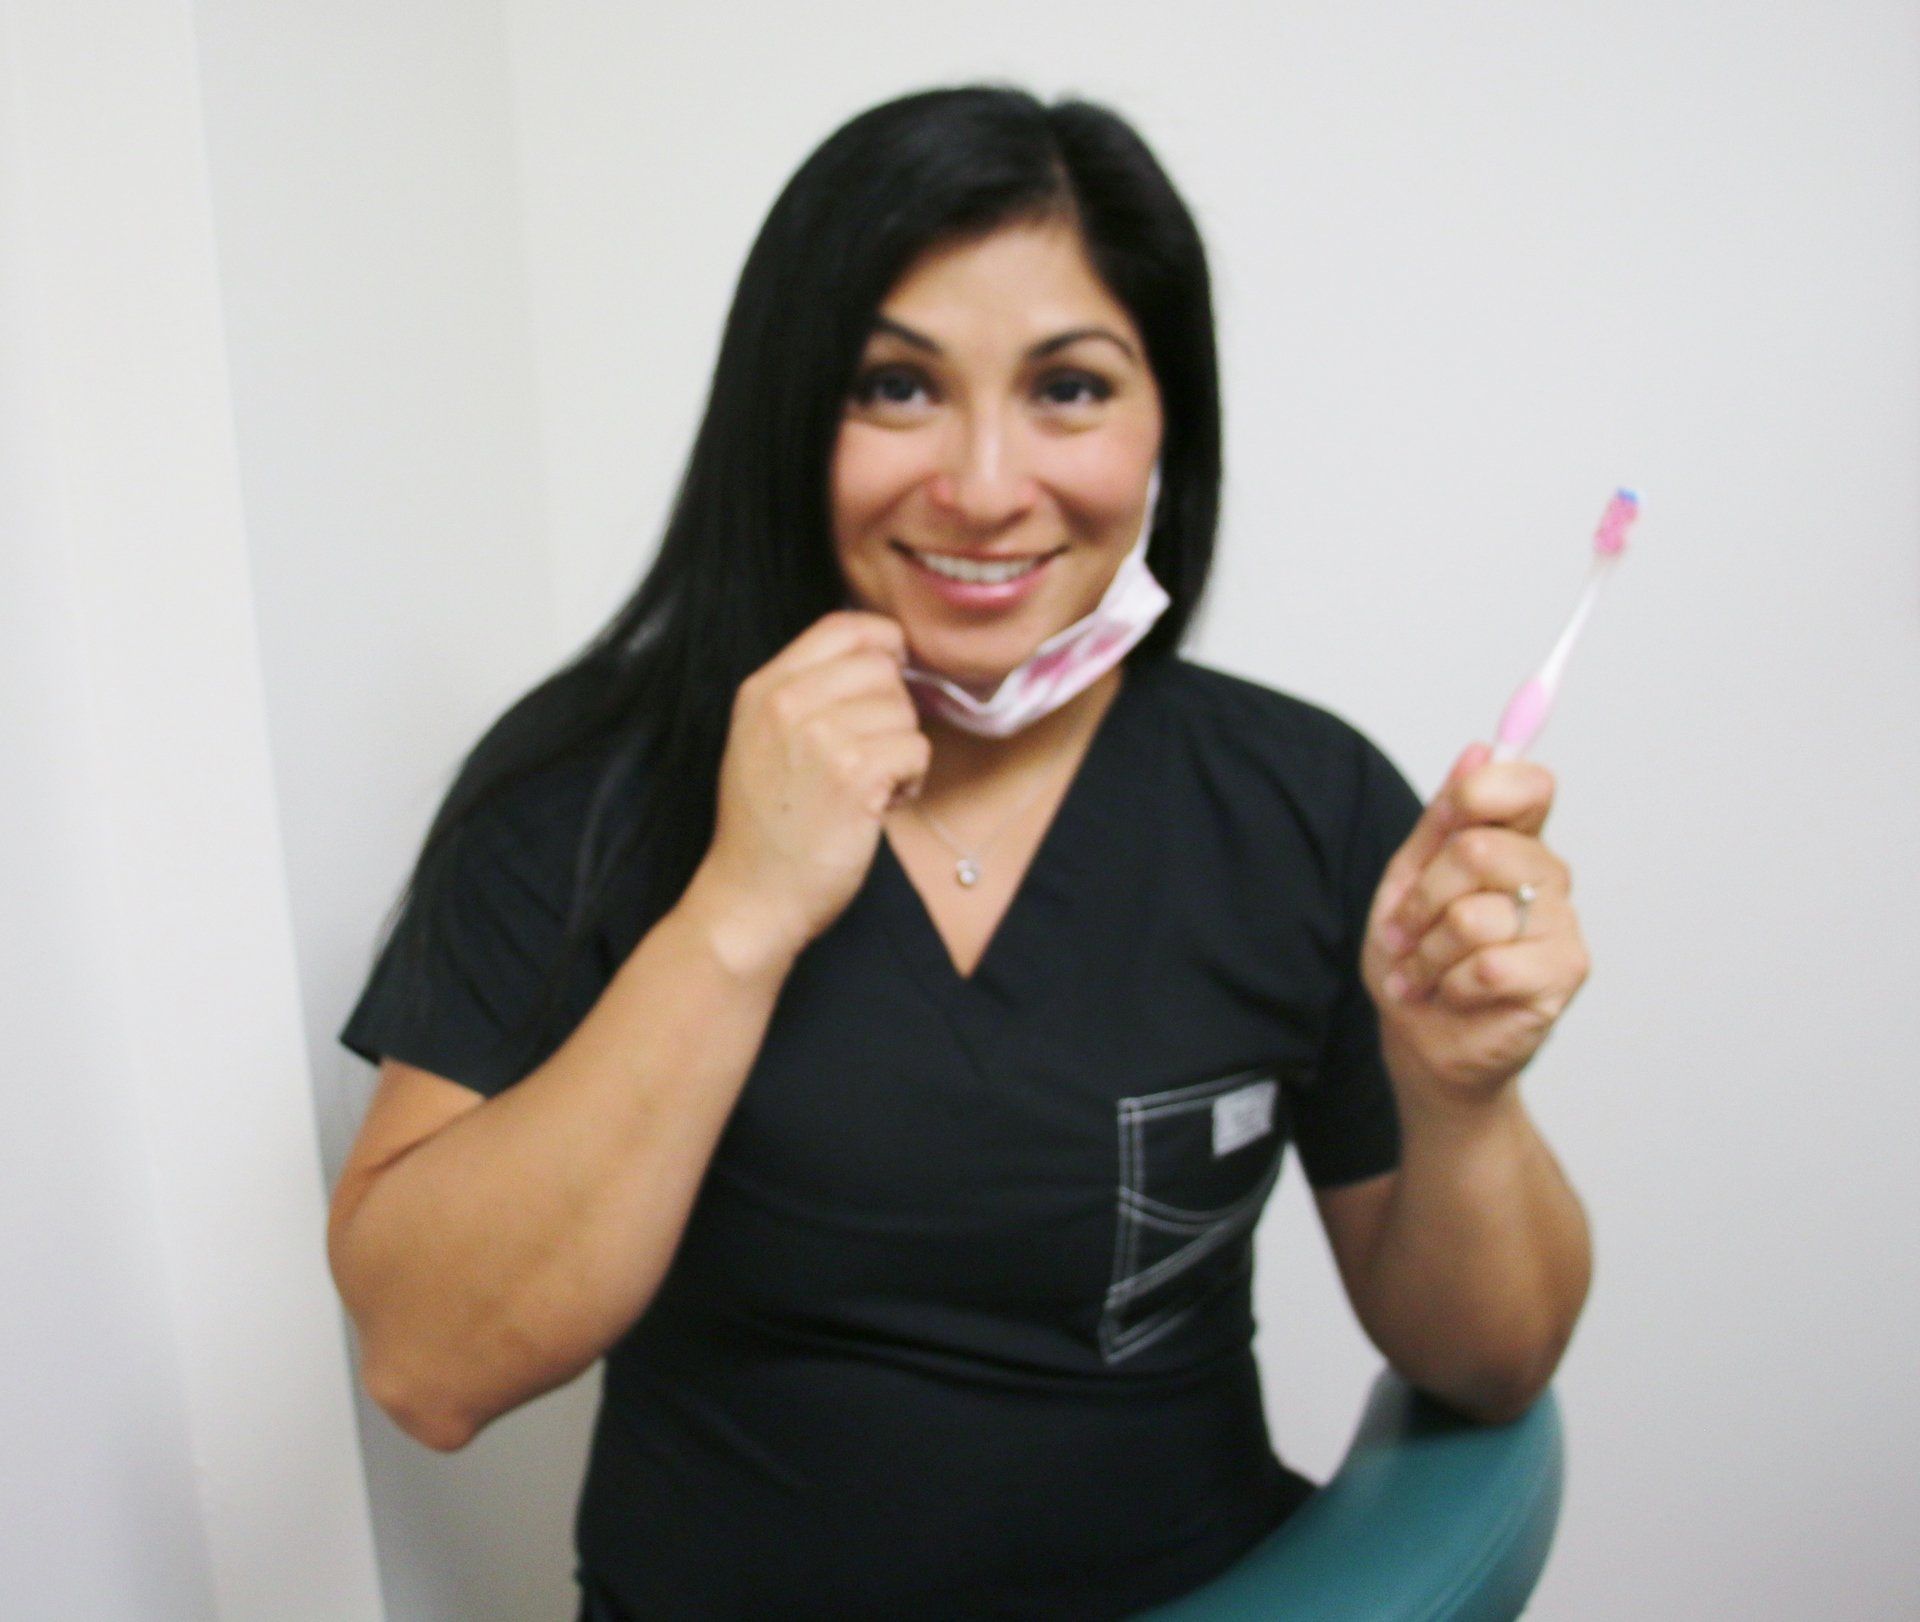 Woman without dental problems thanks to our expert family dentistry in Kailua, HI